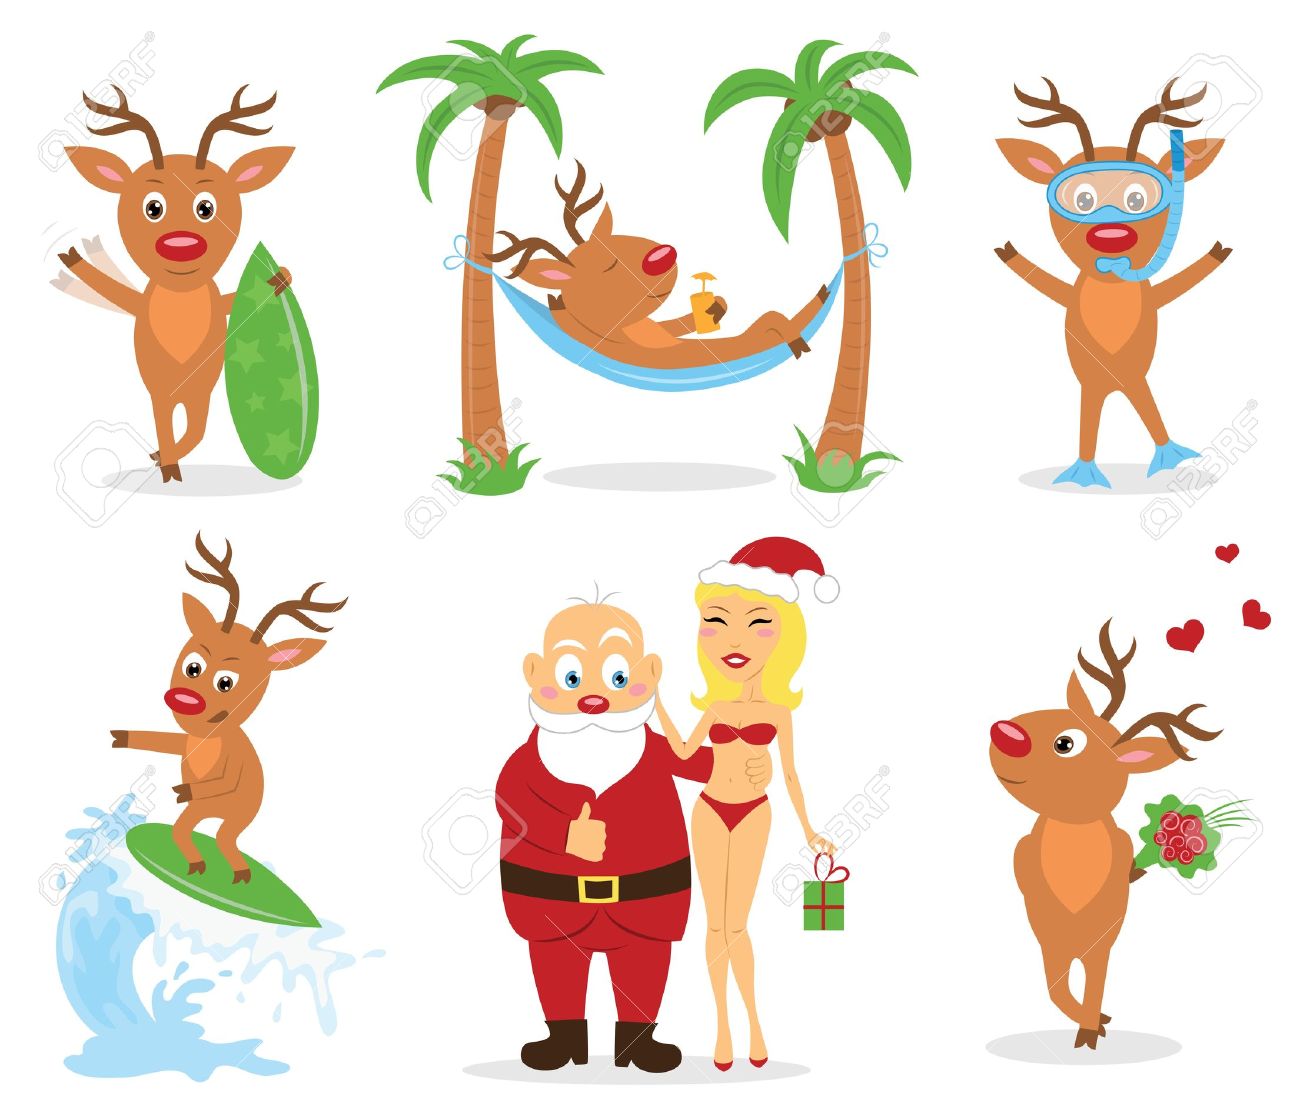 Free Beach Christmas Cliparts, Download Free Clip Art, Free Clip Art.